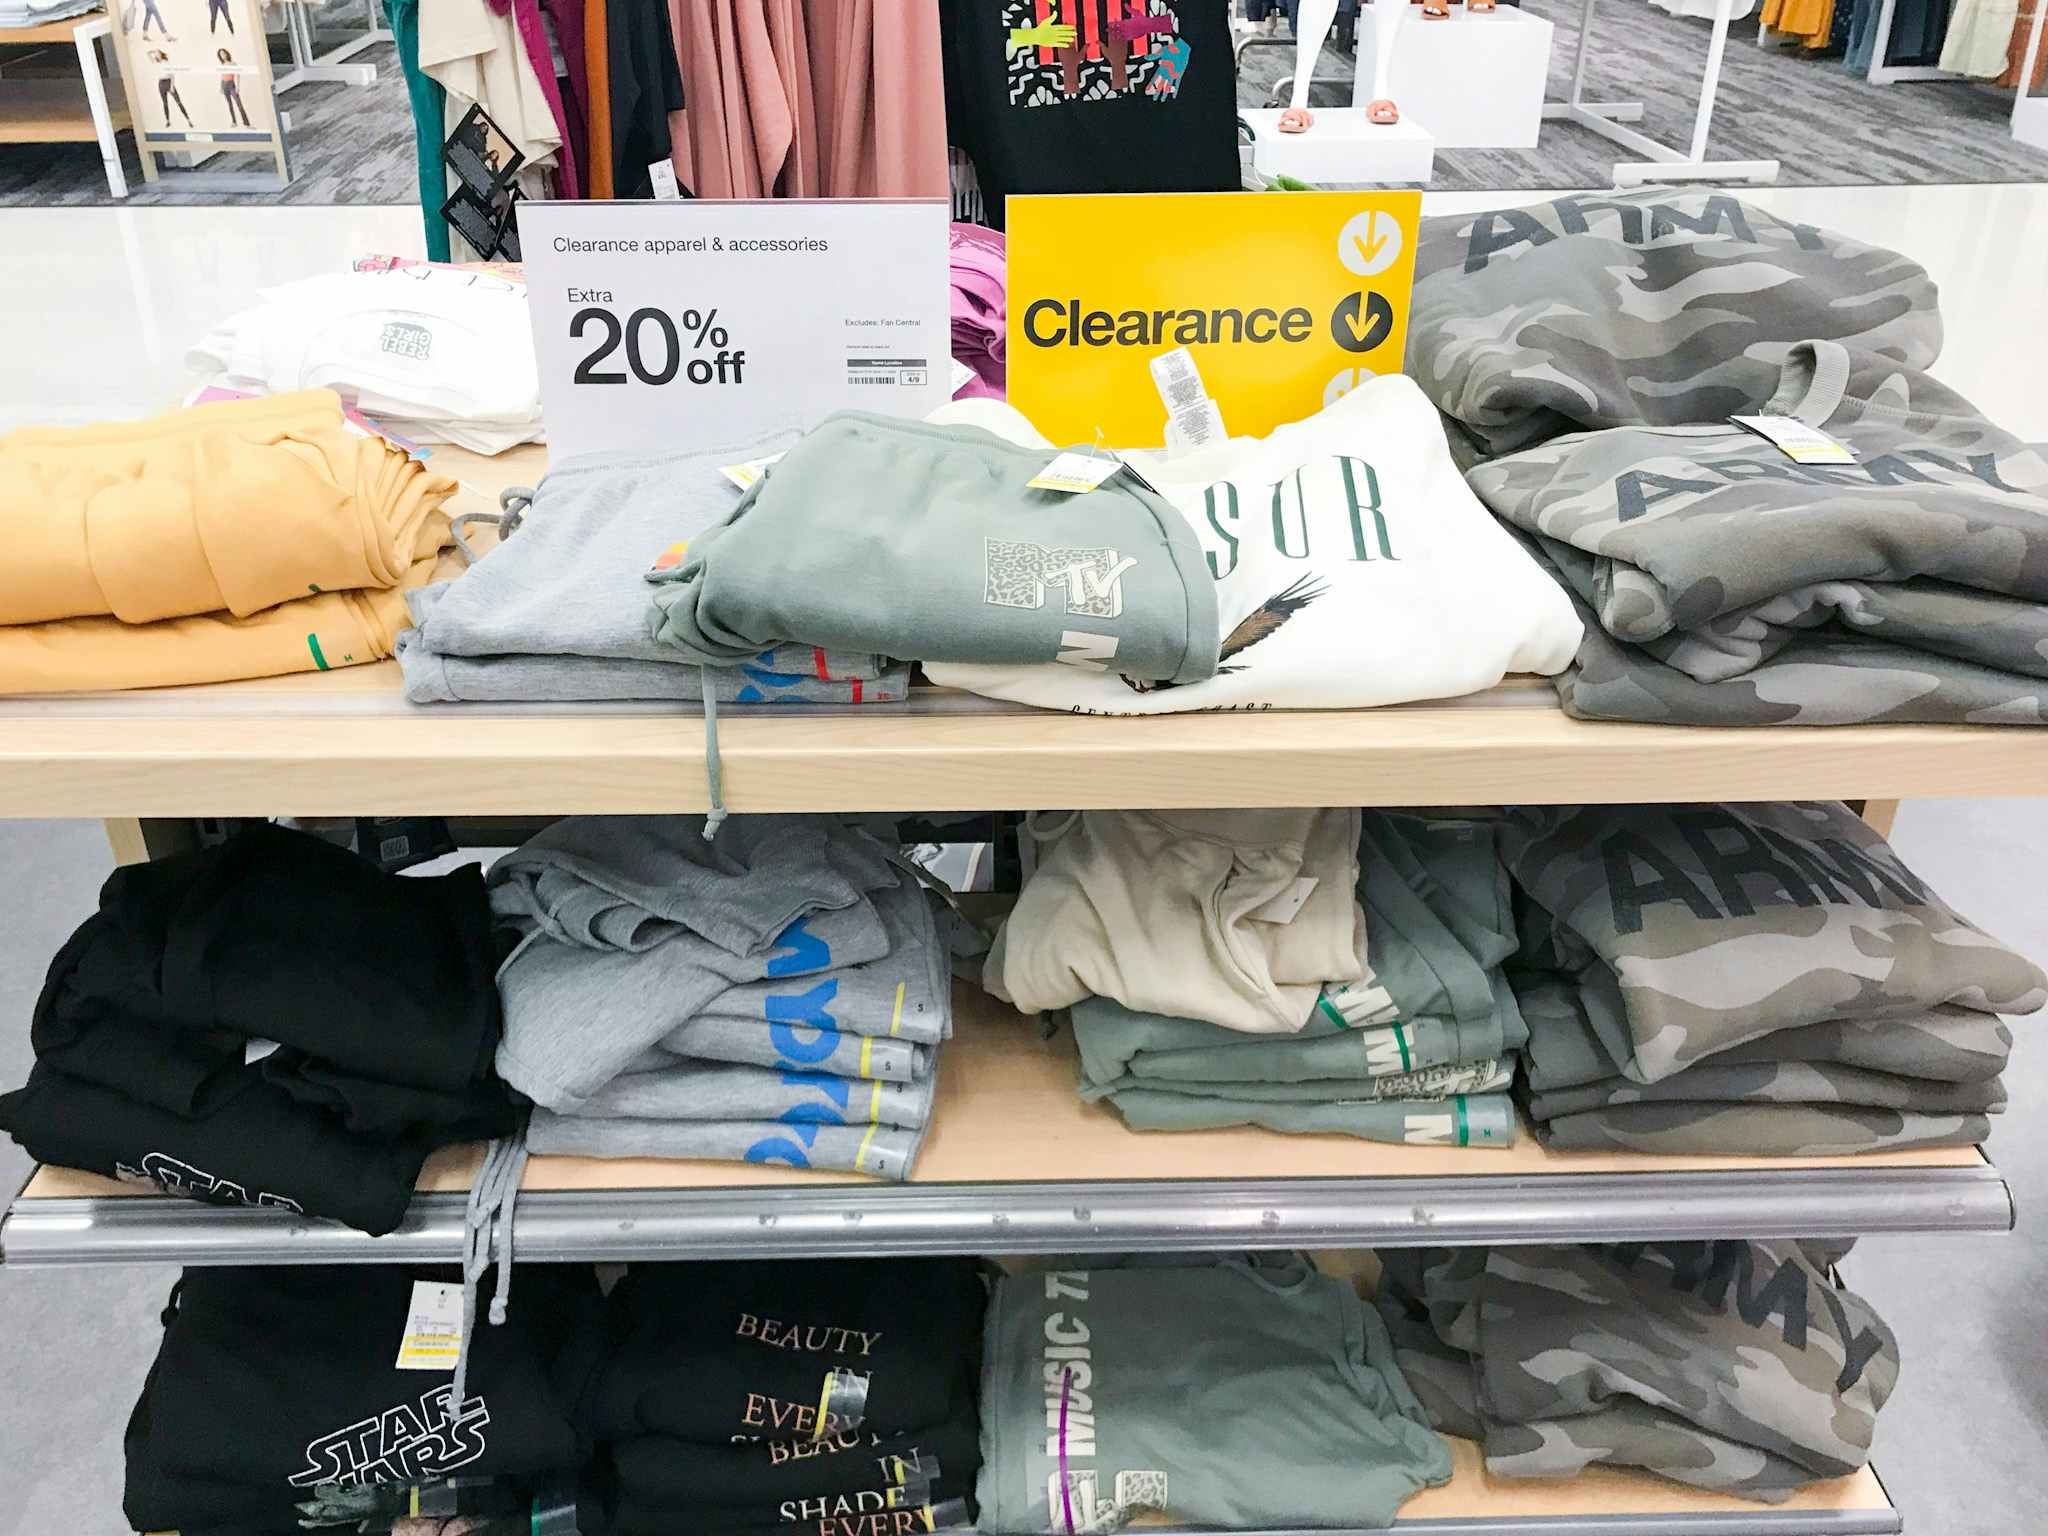 Top Ways to Save on Target Clothes - The Krazy Coupon Lady